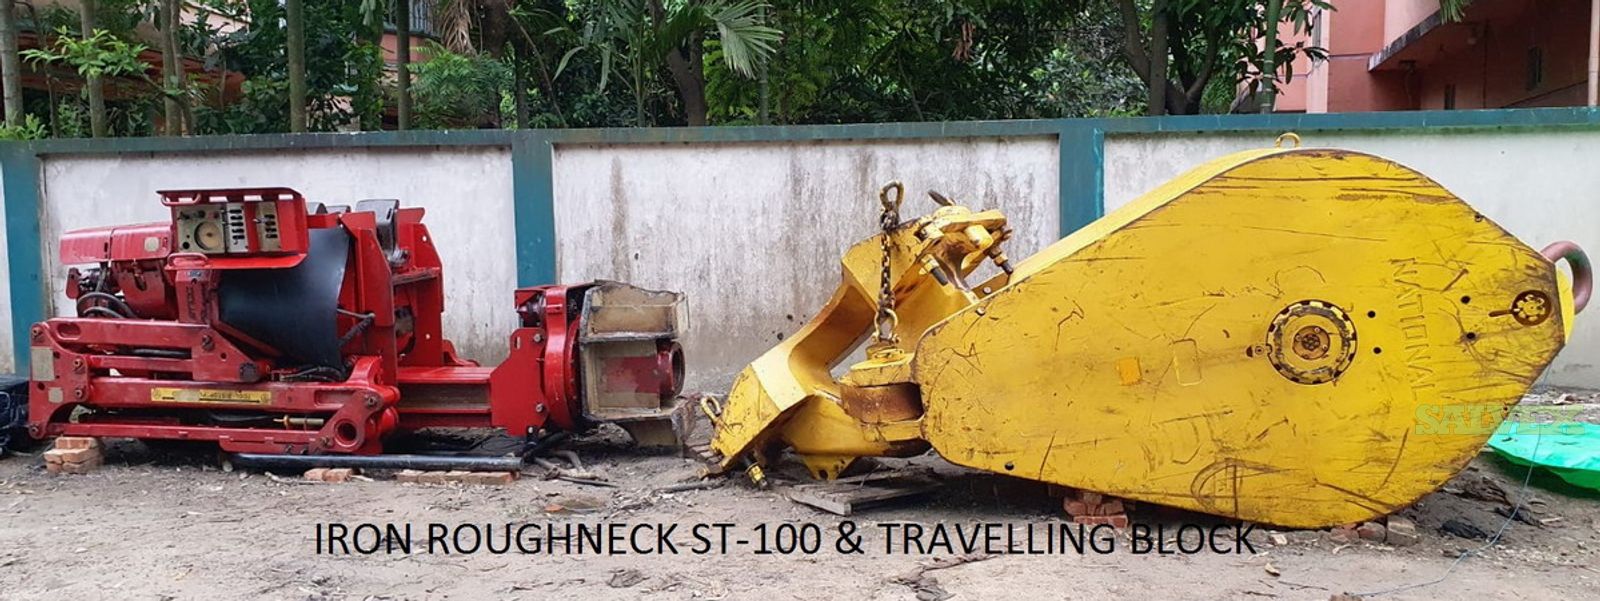 Used Iron Roughneck, Travelling Block and Assemby Grabs Support Equipment